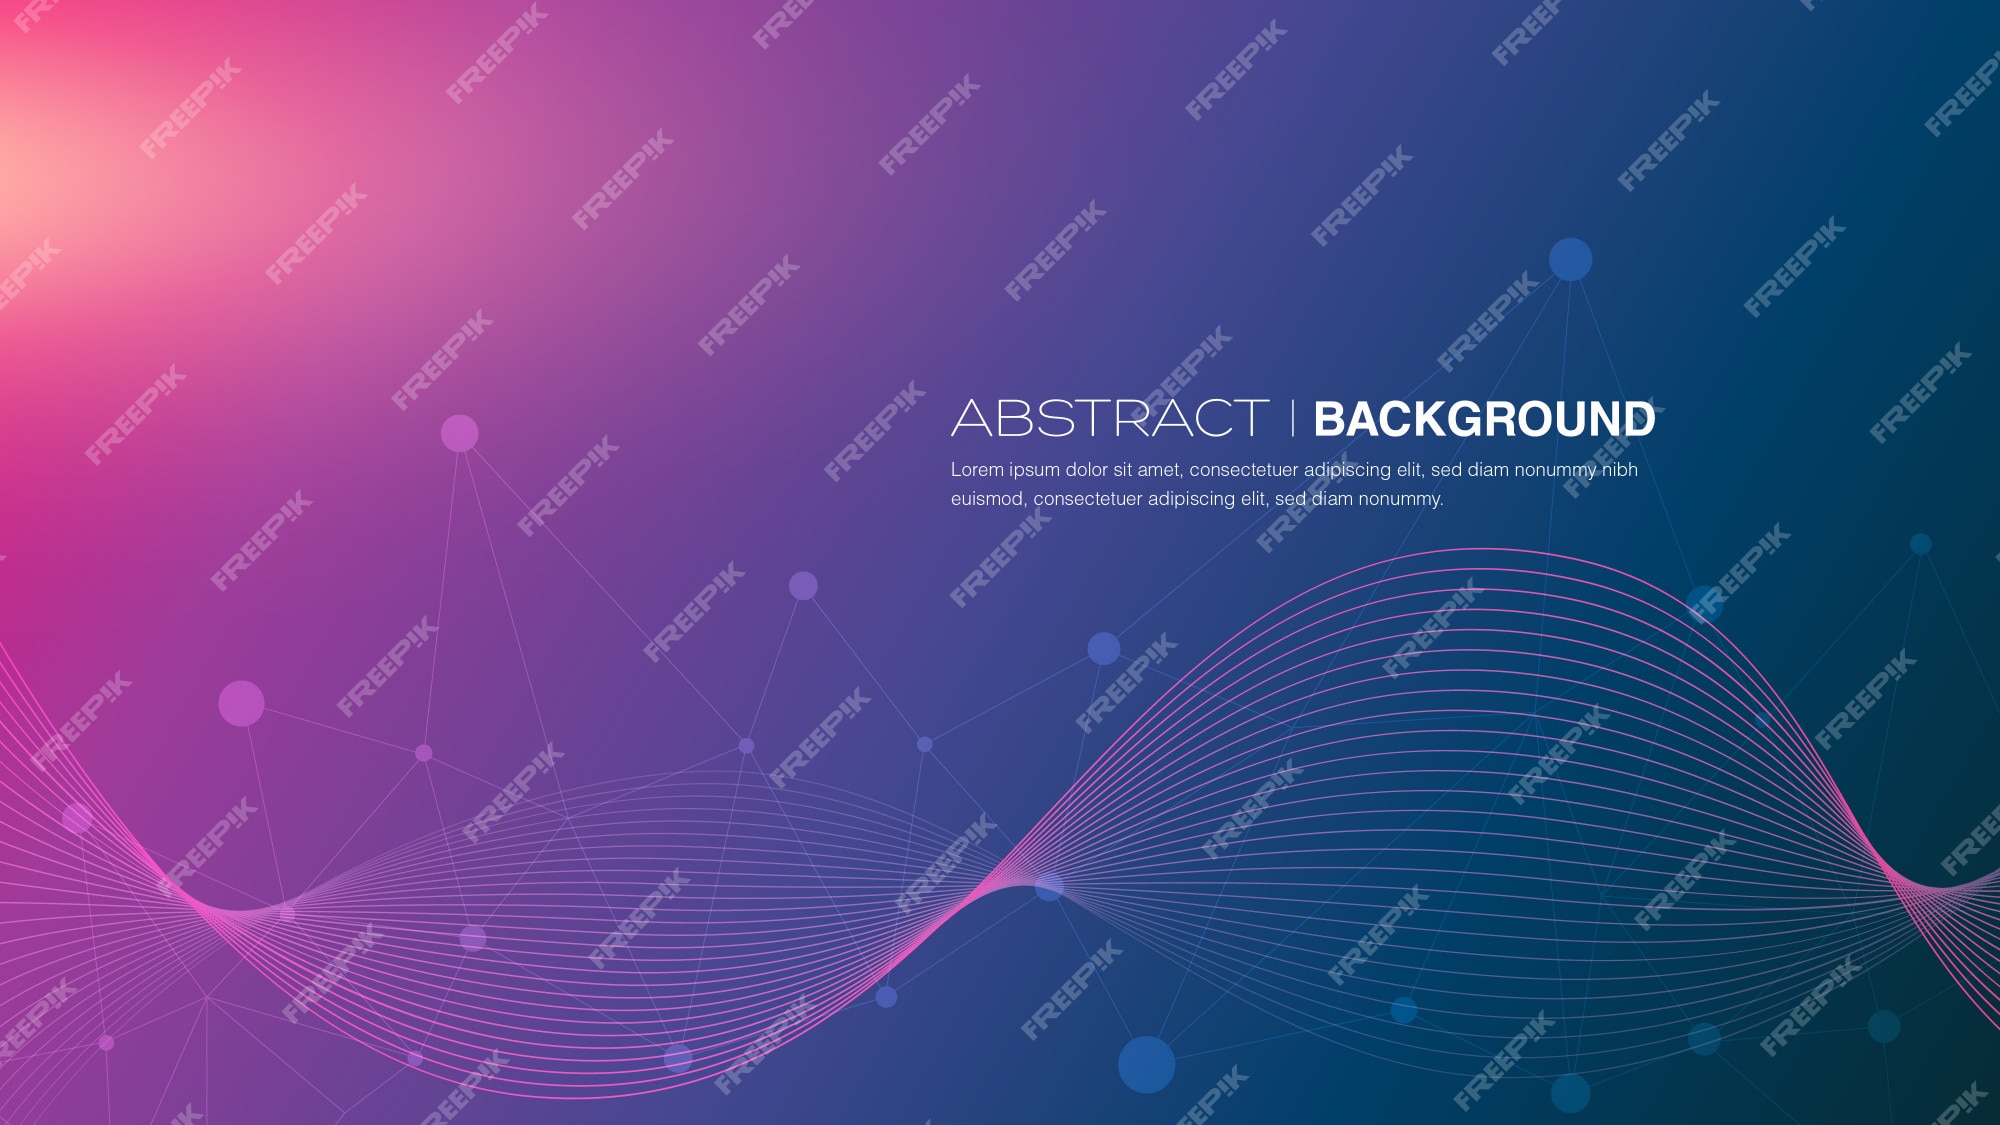 Abstract background Vectors & Illustrations for Free Download | Freepik